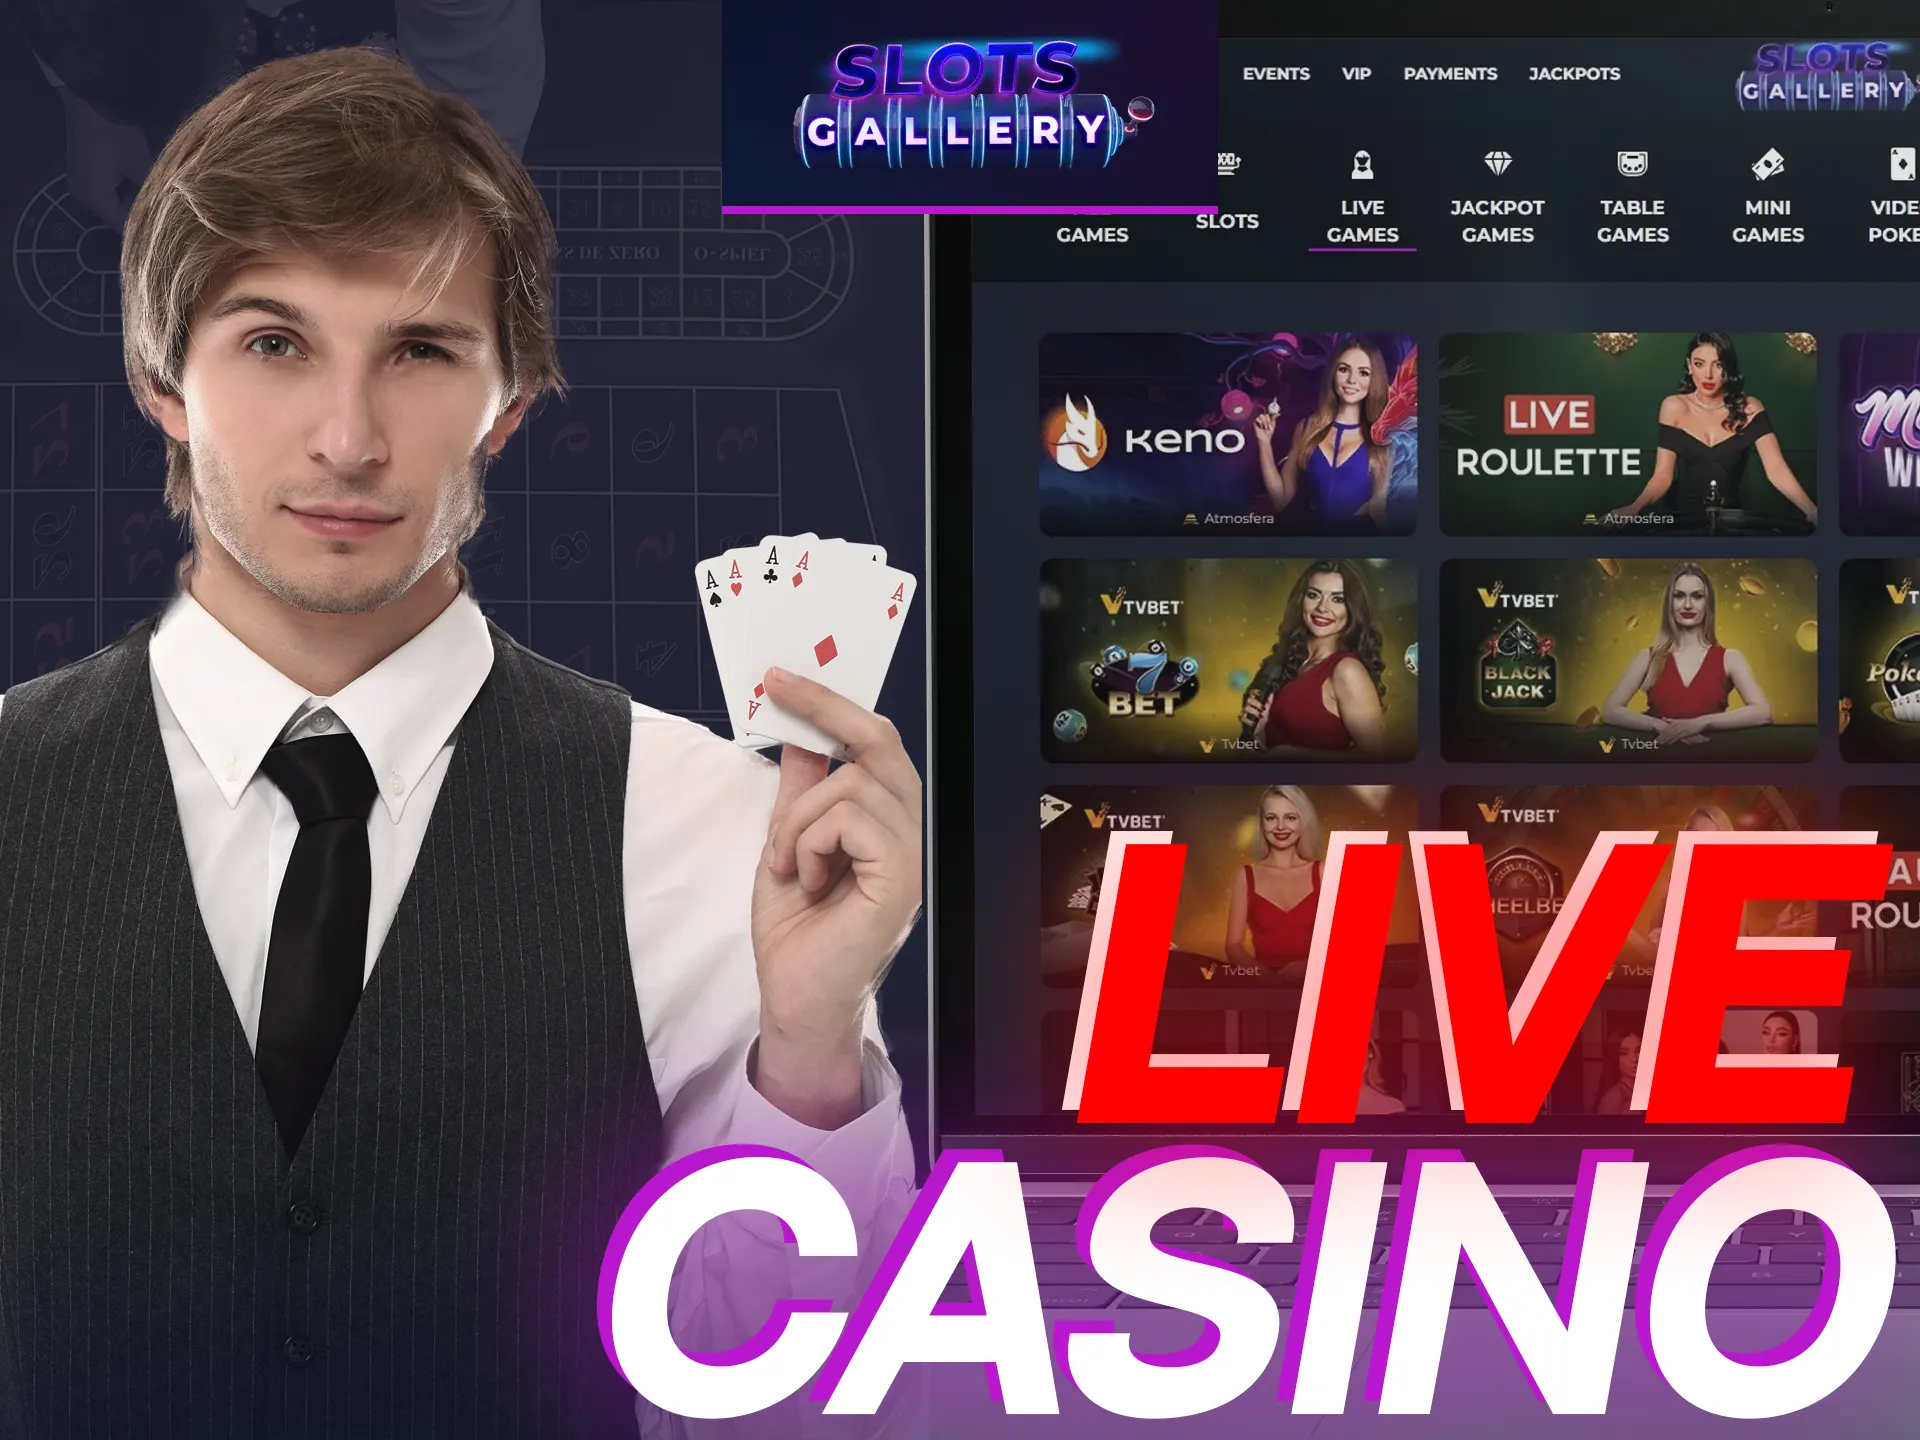 Experience live dealer games at Slots Gallery`s casino for interactive fun.